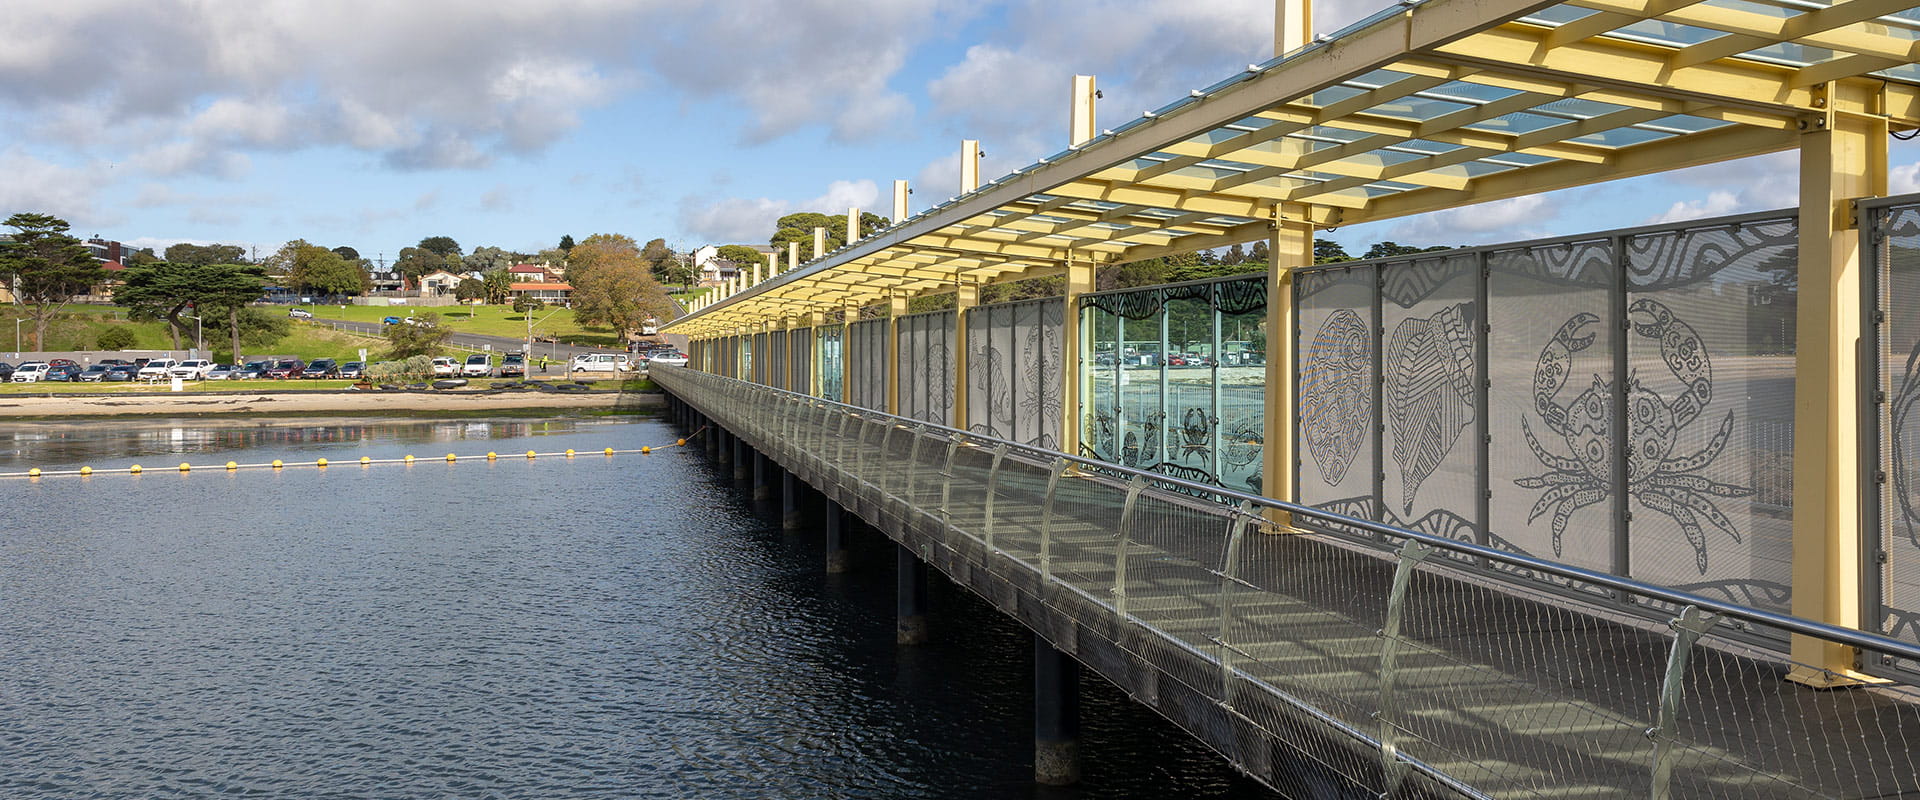 The pier walkway is sheltered and features aboriginal sea life artwork on the glass. Houses and a hill can be seen in the background.